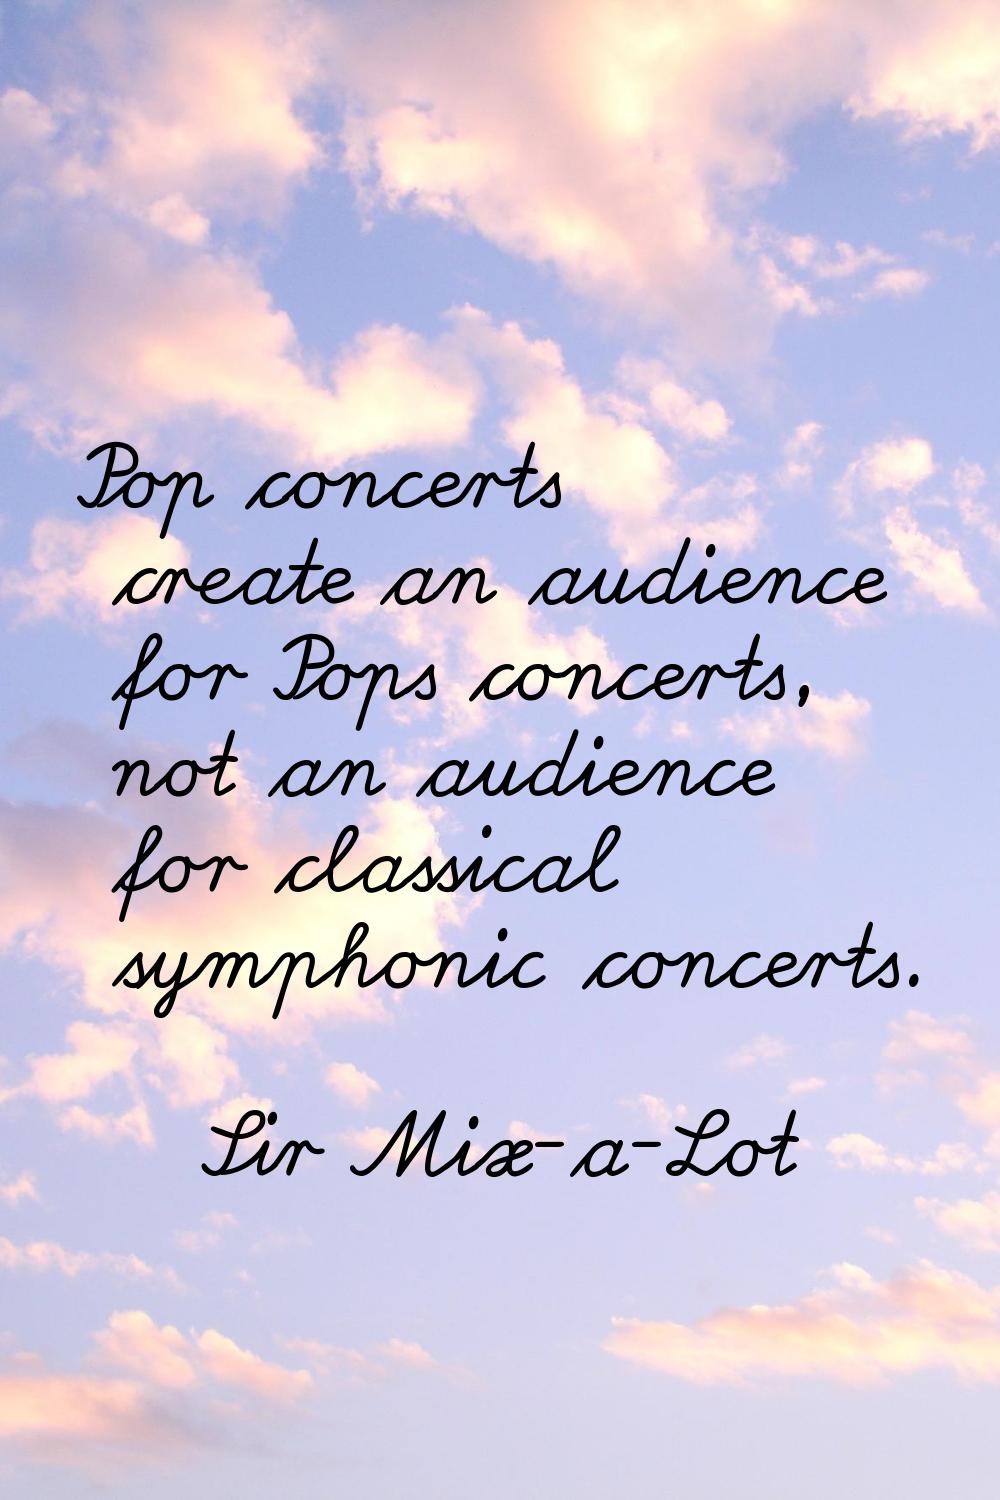 Pop concerts create an audience for Pops concerts, not an audience for classical symphonic concerts